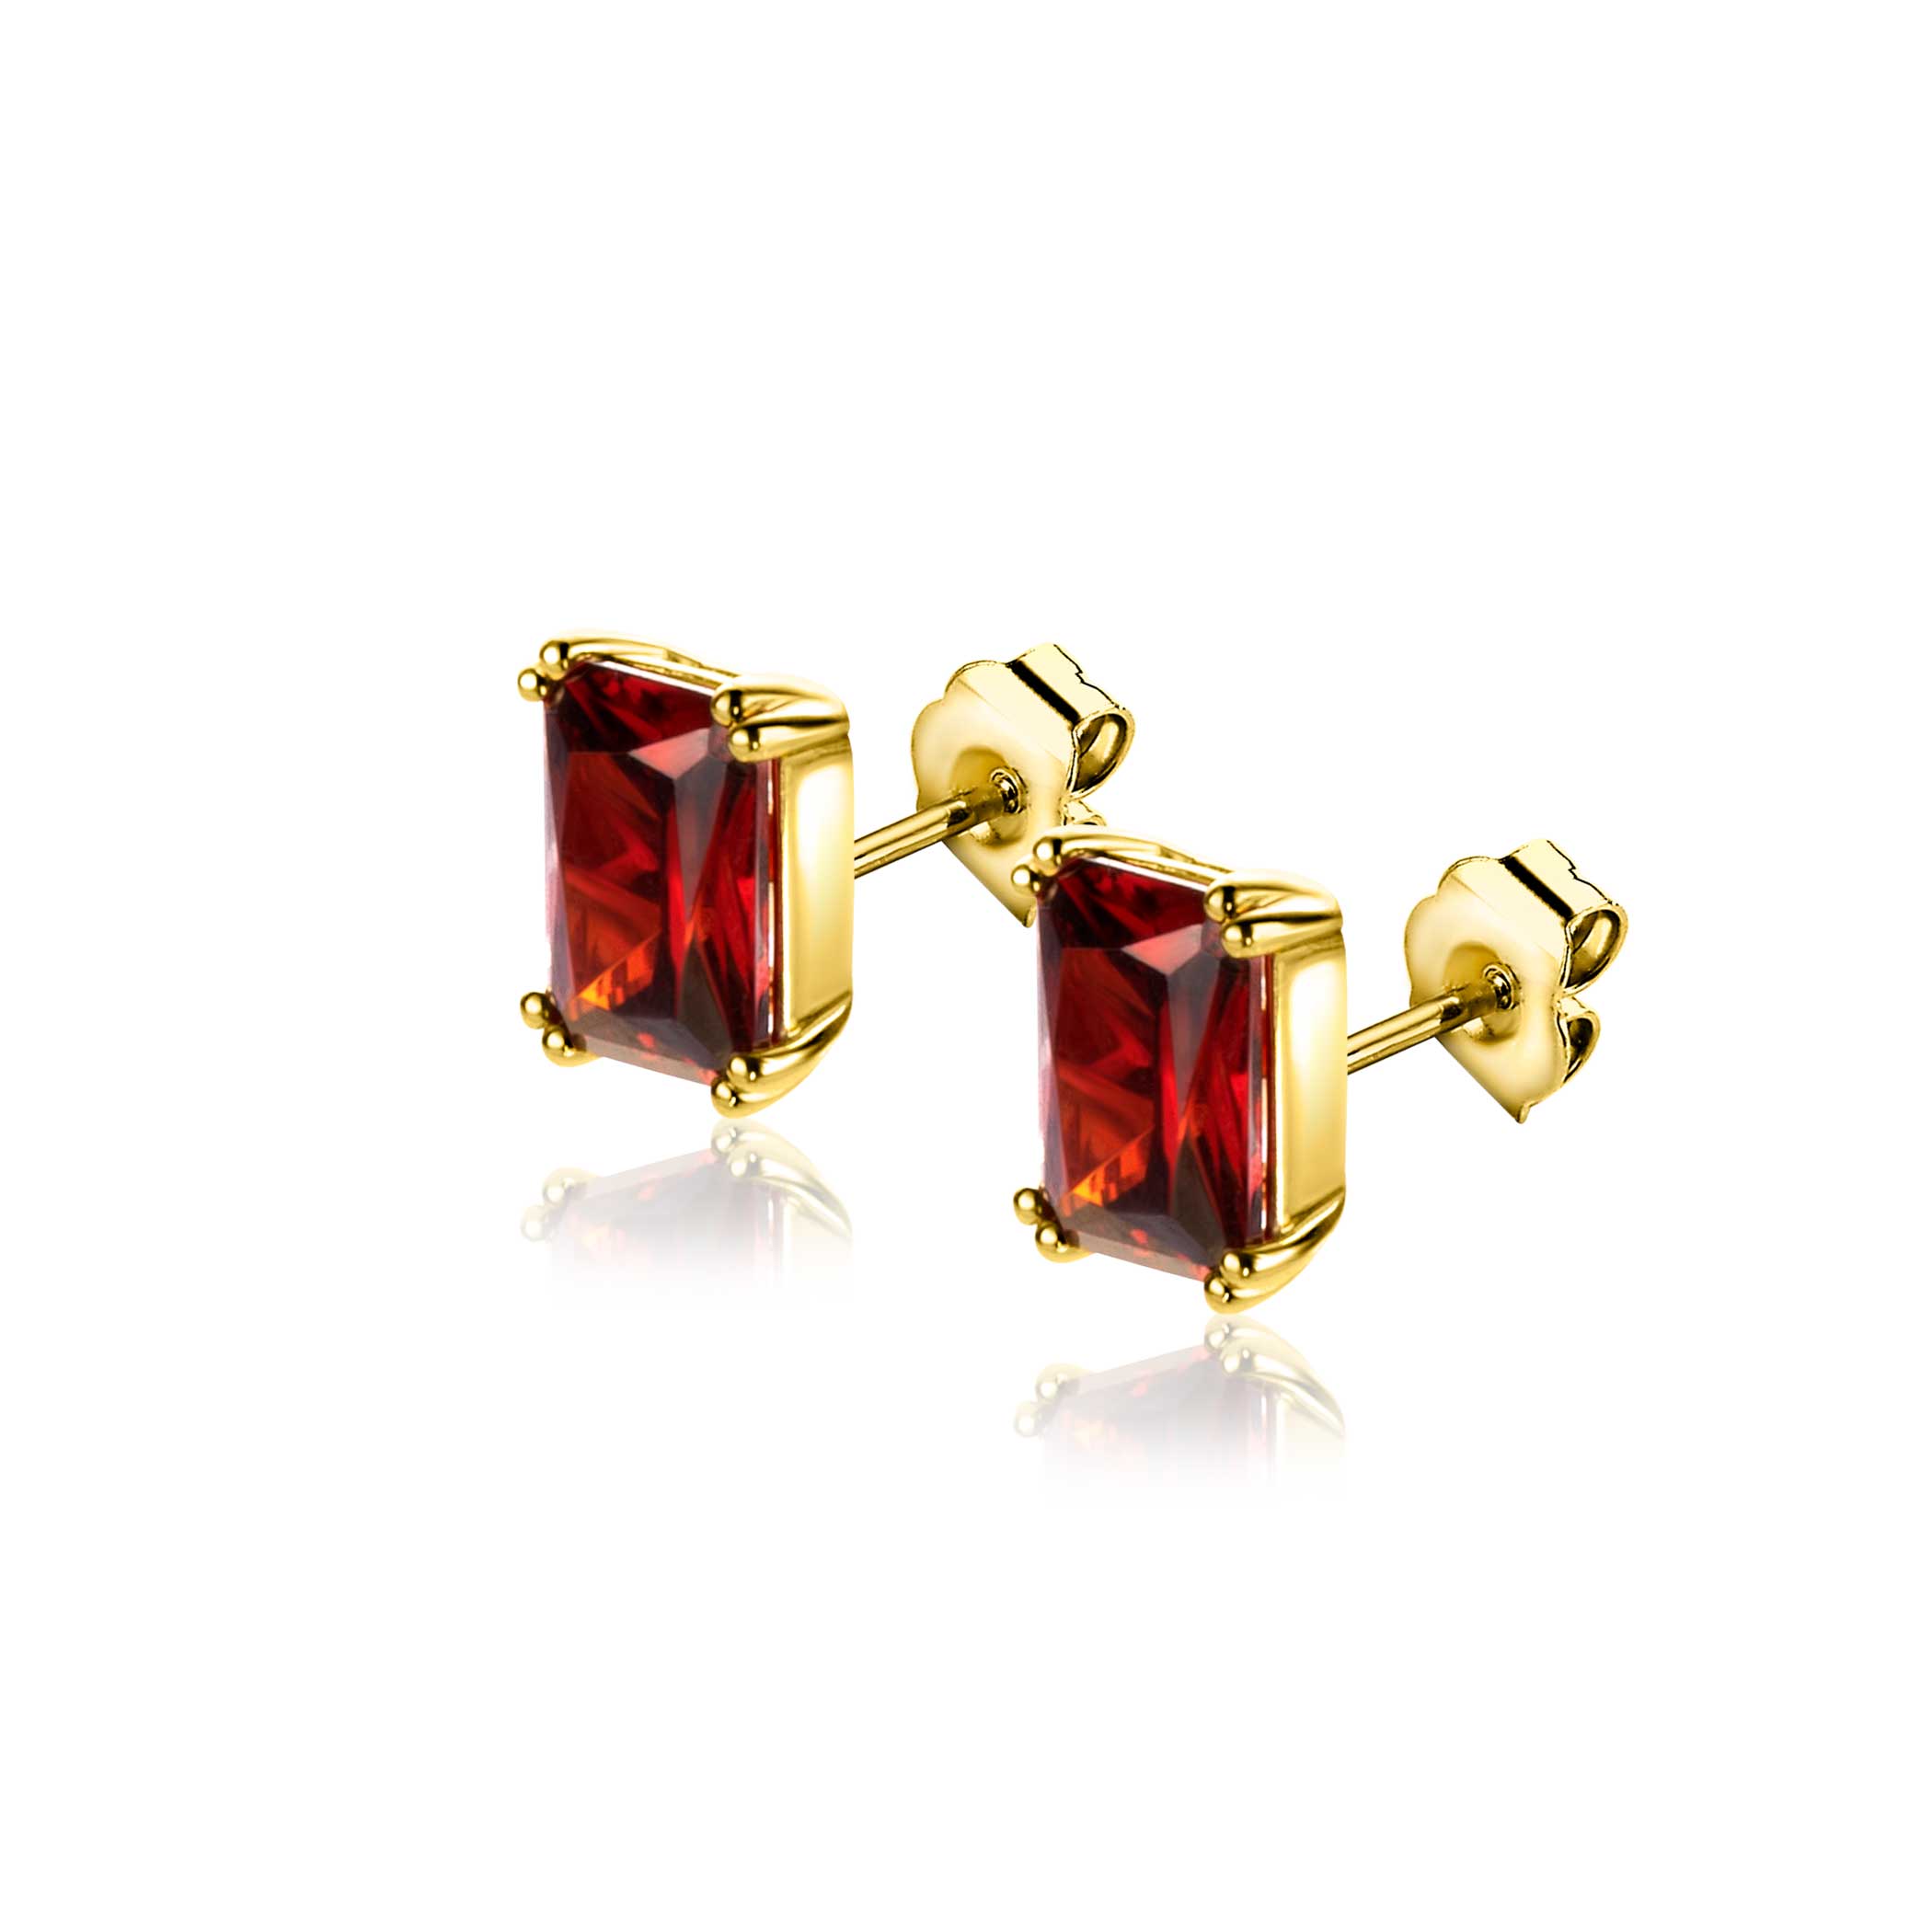 9mm ZINZI Gold Plated Sterling Silver Stud Earrings Prong Setting with Red Garnet Color Stone ZIO2392R